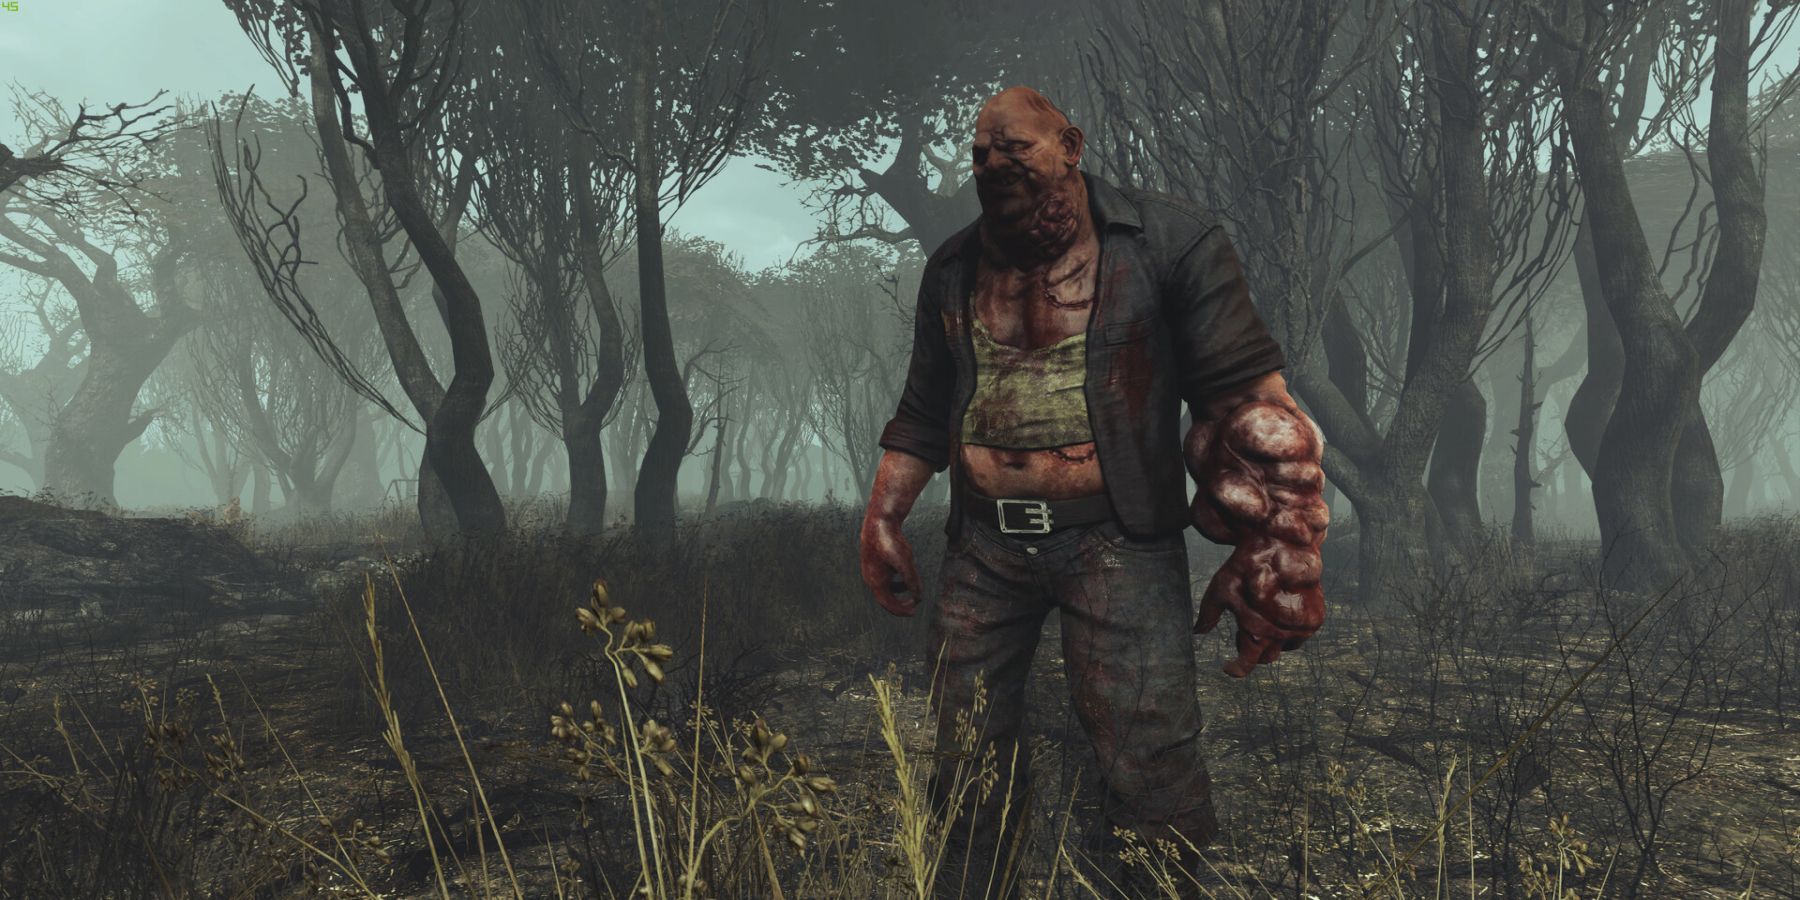 Swampfolk Bruiser standing in the swamps of Point Lookout